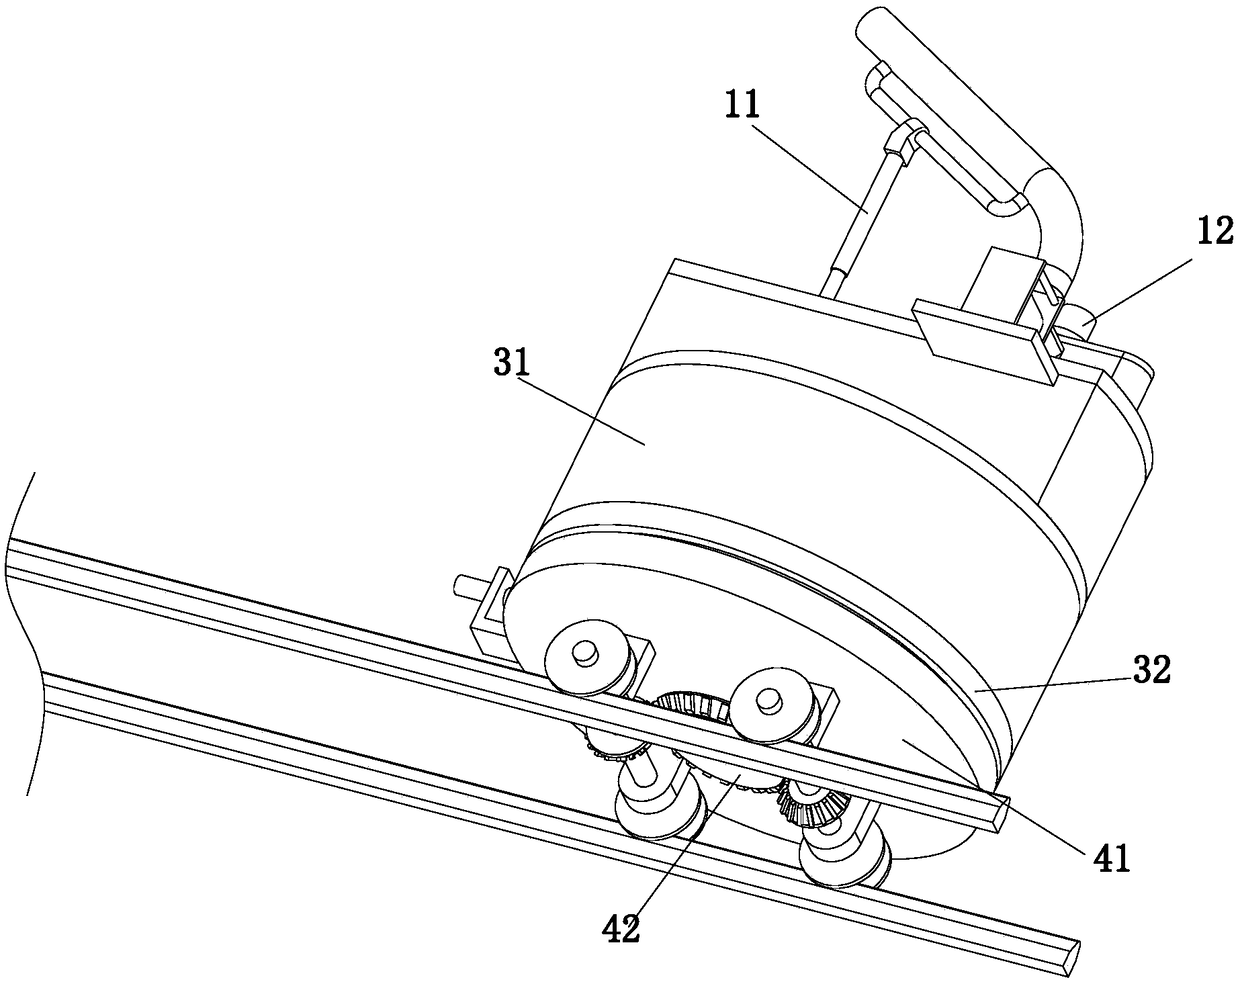 Working method of universal automatic ball serving device for tennis training